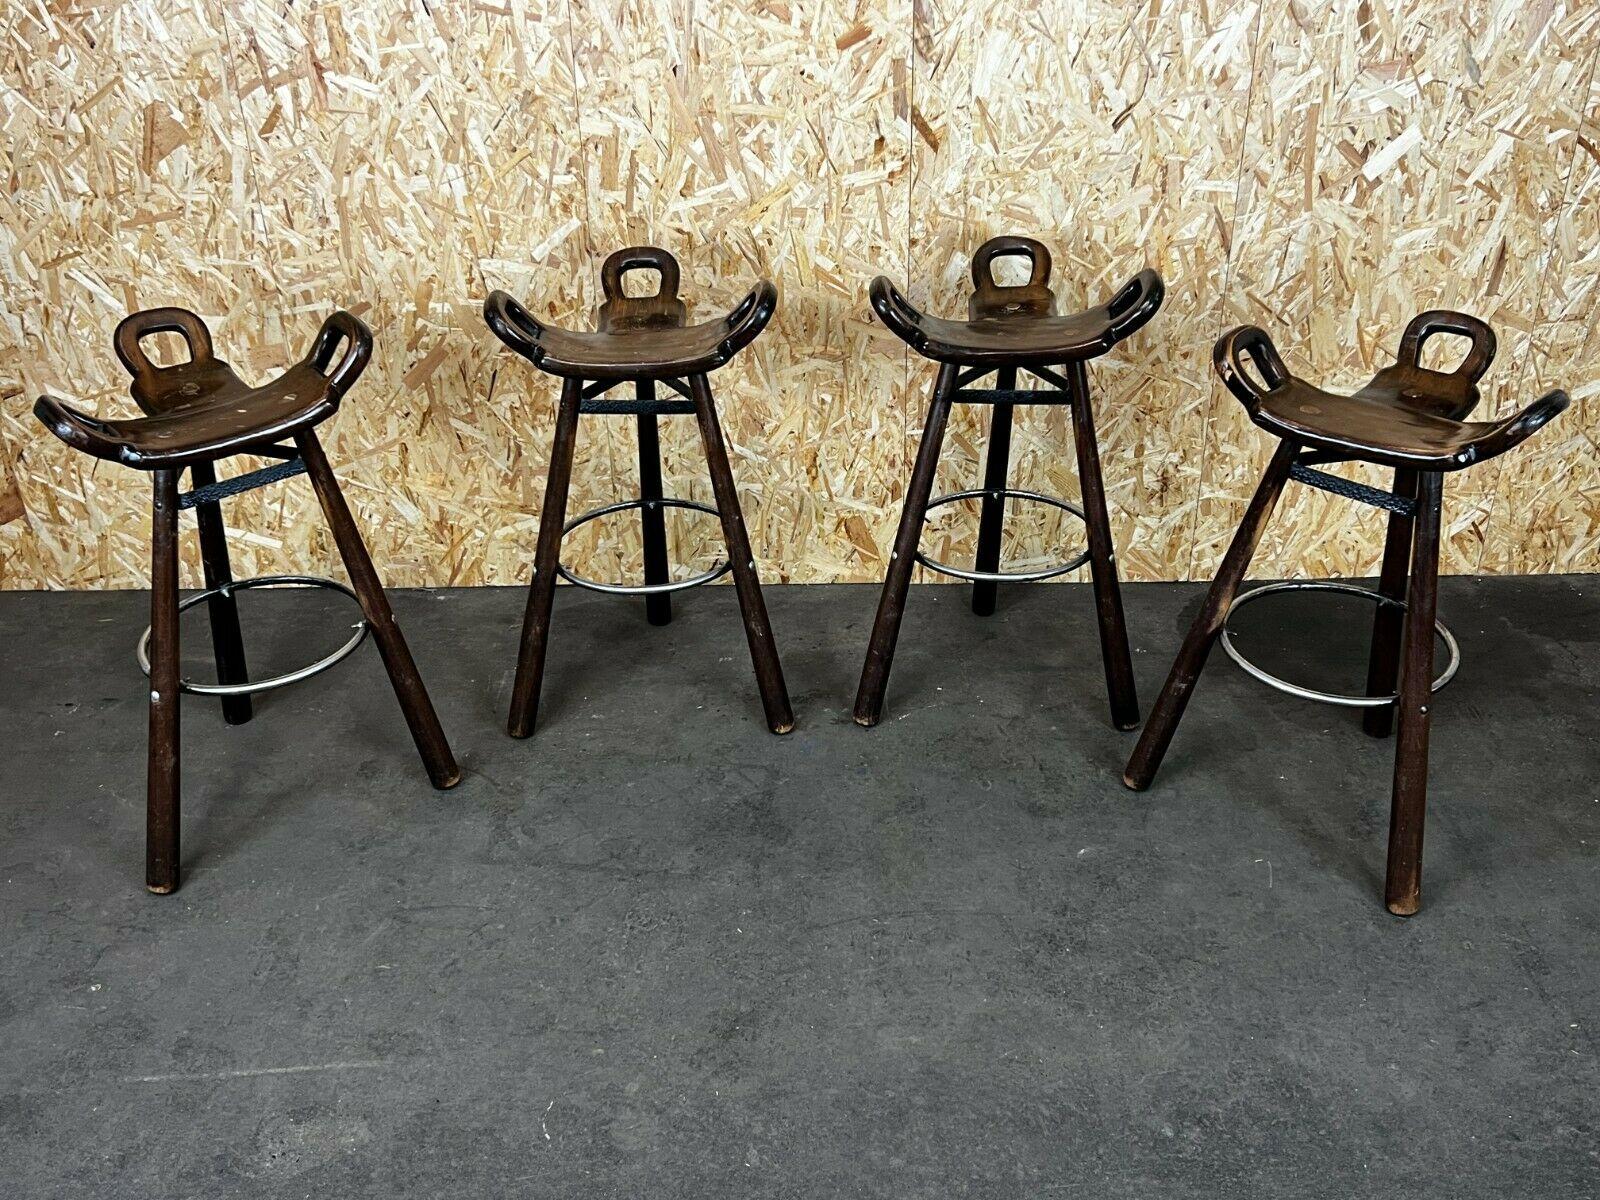 4x 50s 60s bar stools barstools attributed to Carl Malmsten Sweden Design

Object: 4x bar stools

Manufacturer: Attributed to Carl Malmsten

Condition: vintage

Age: around 1950-1960

Dimensions:

50cm x 46cm x 83.5cm
Seat height =